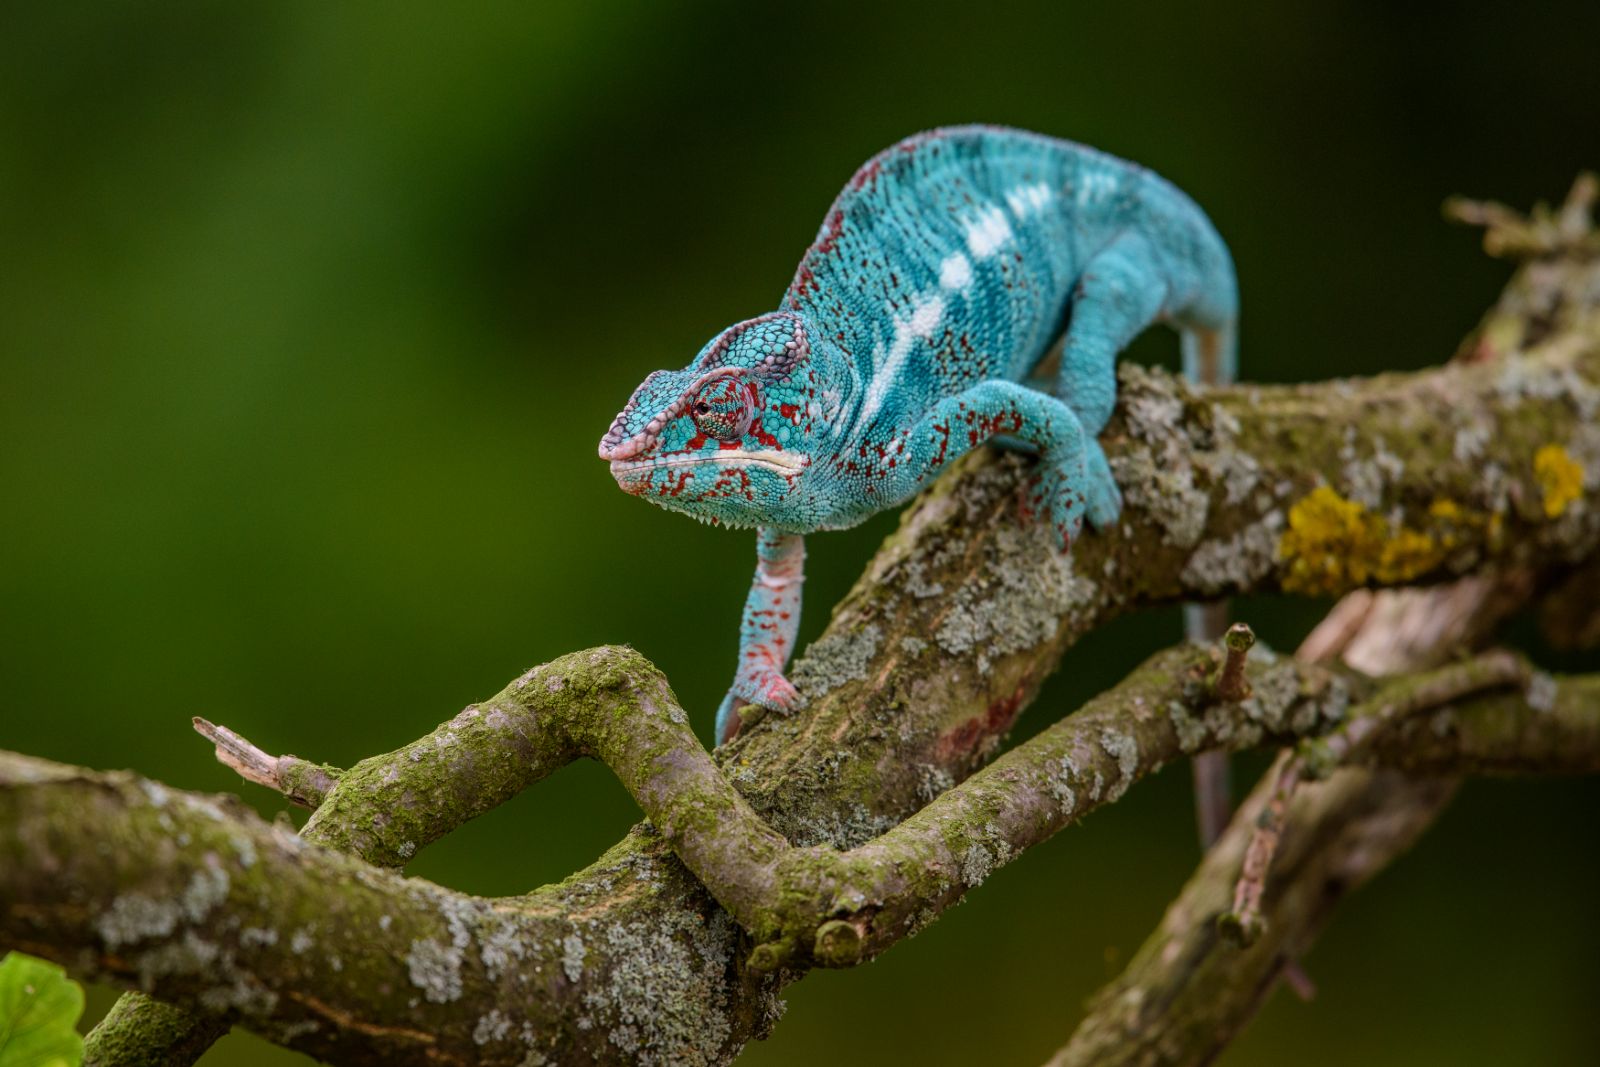 Blue panther chameleon spotted in the treetops of Madagascar